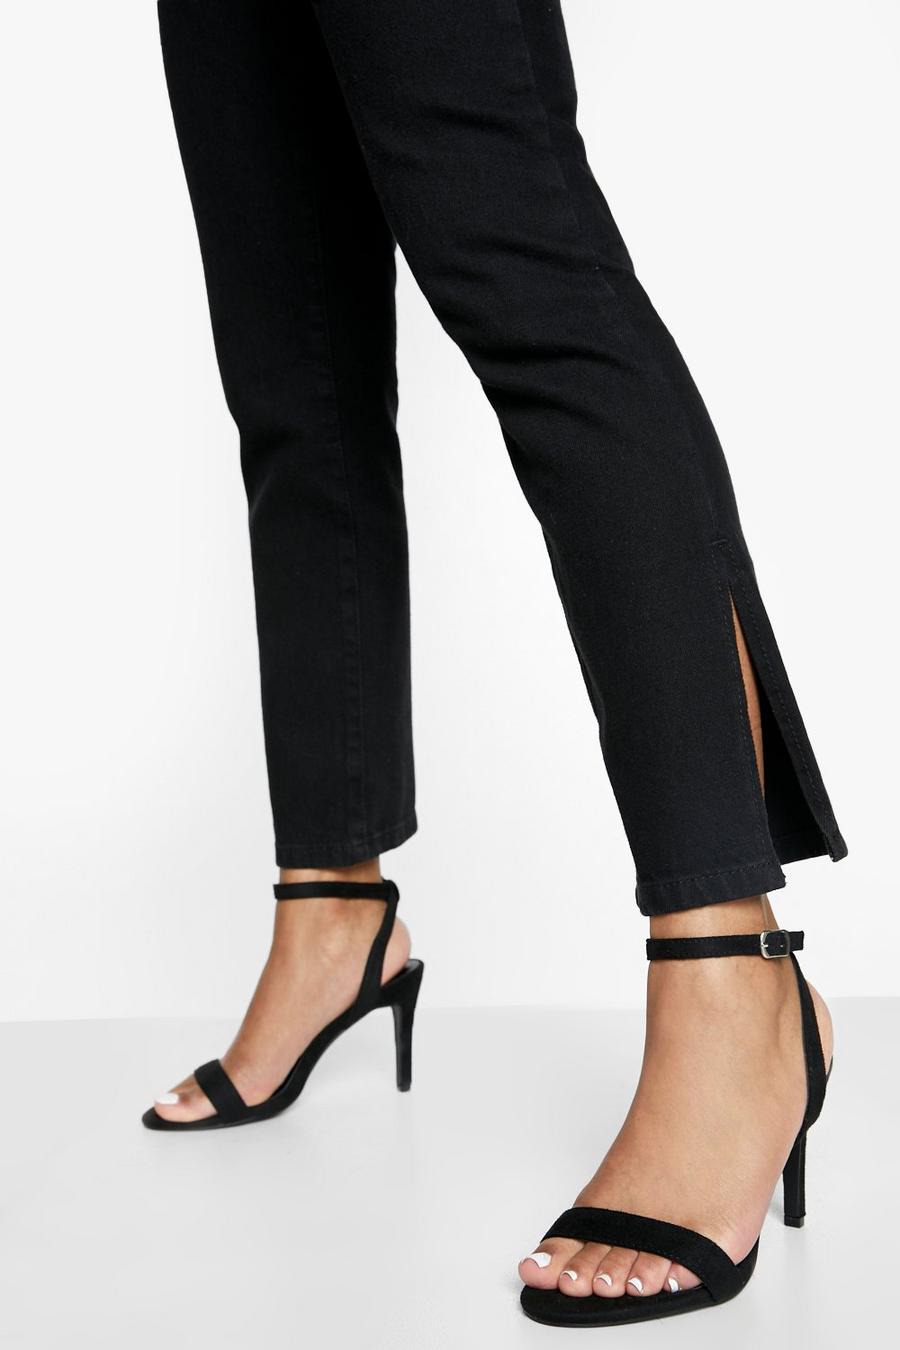 Black negro Low Barely There Heels